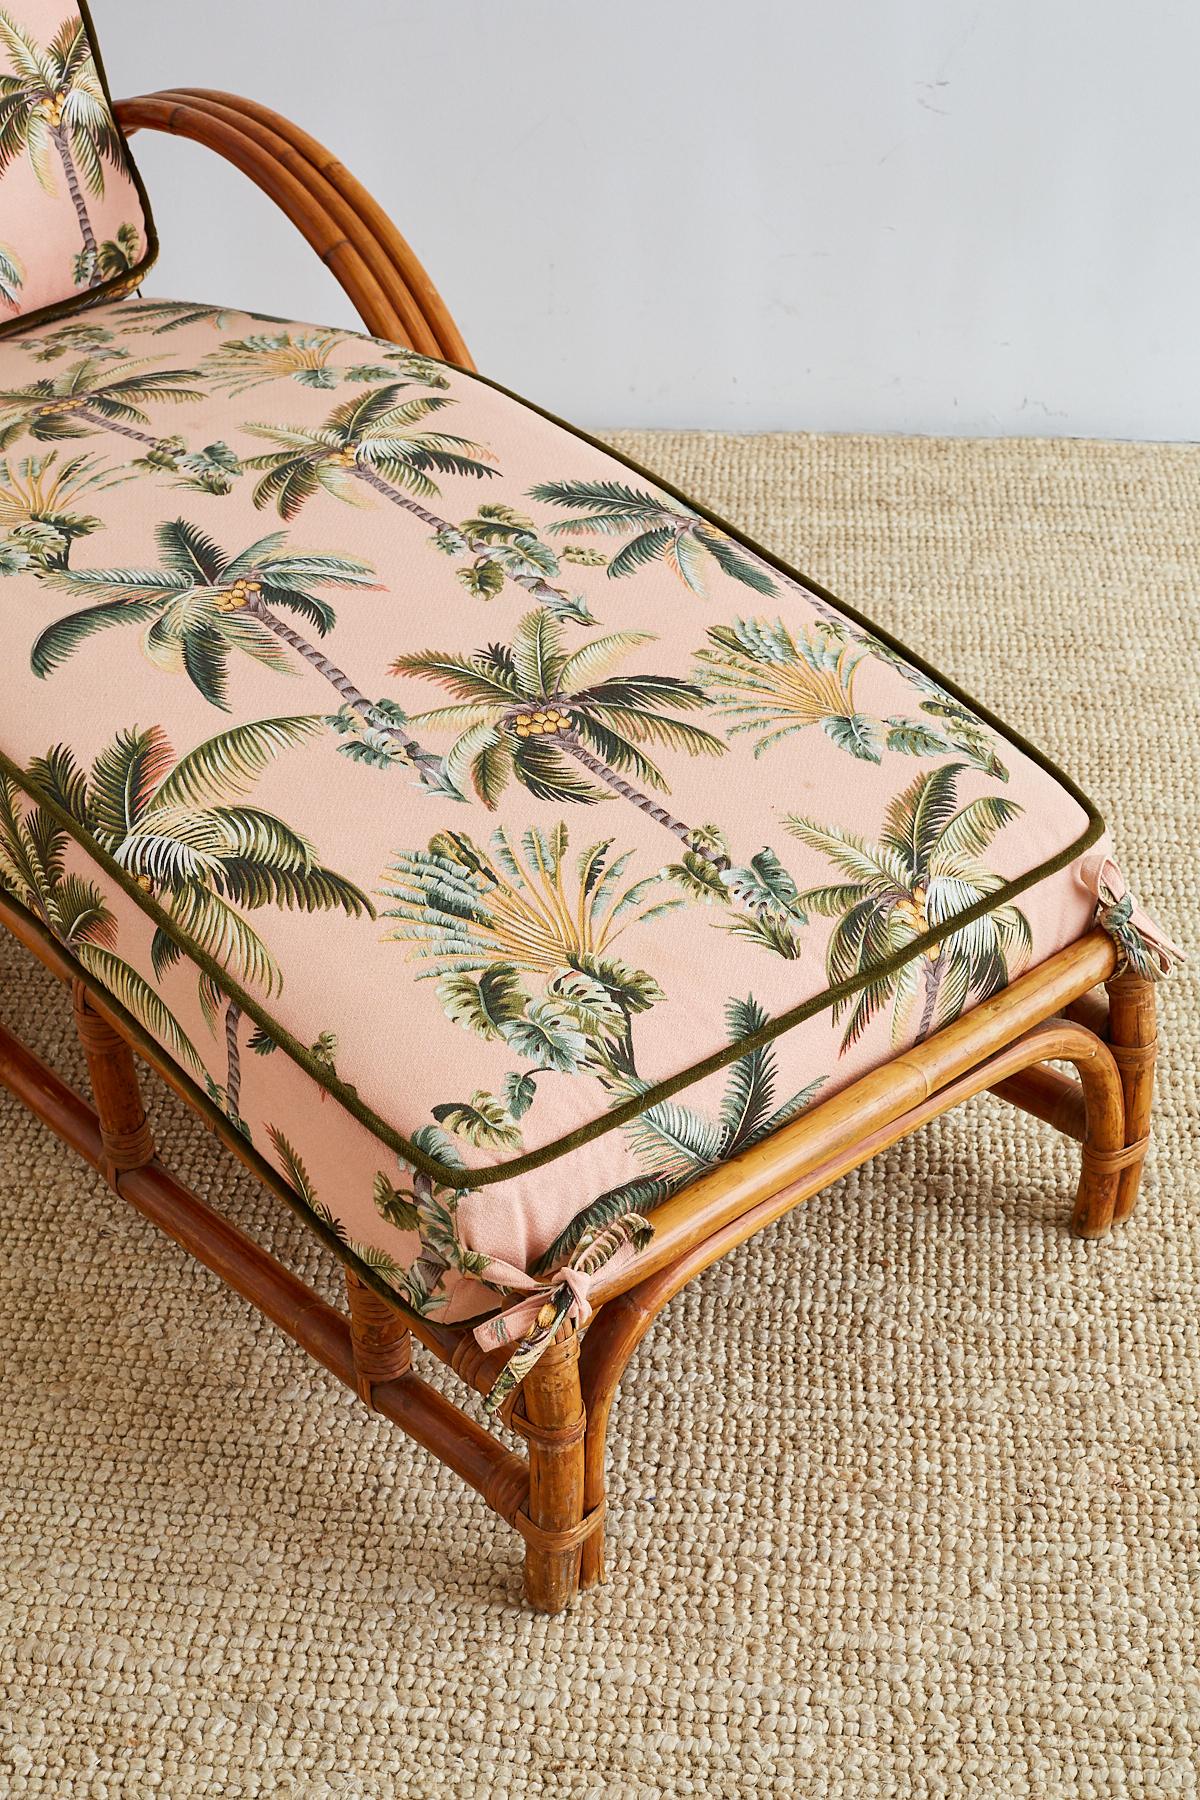 Festive three strand rattan chaise lounge or longue made in the manner and style of Paul Frankl. Authentic steam bent rattan frame supporting thick padded cushions with a Florida regency style fabric of palms. This Mid-Century Modern chaise is